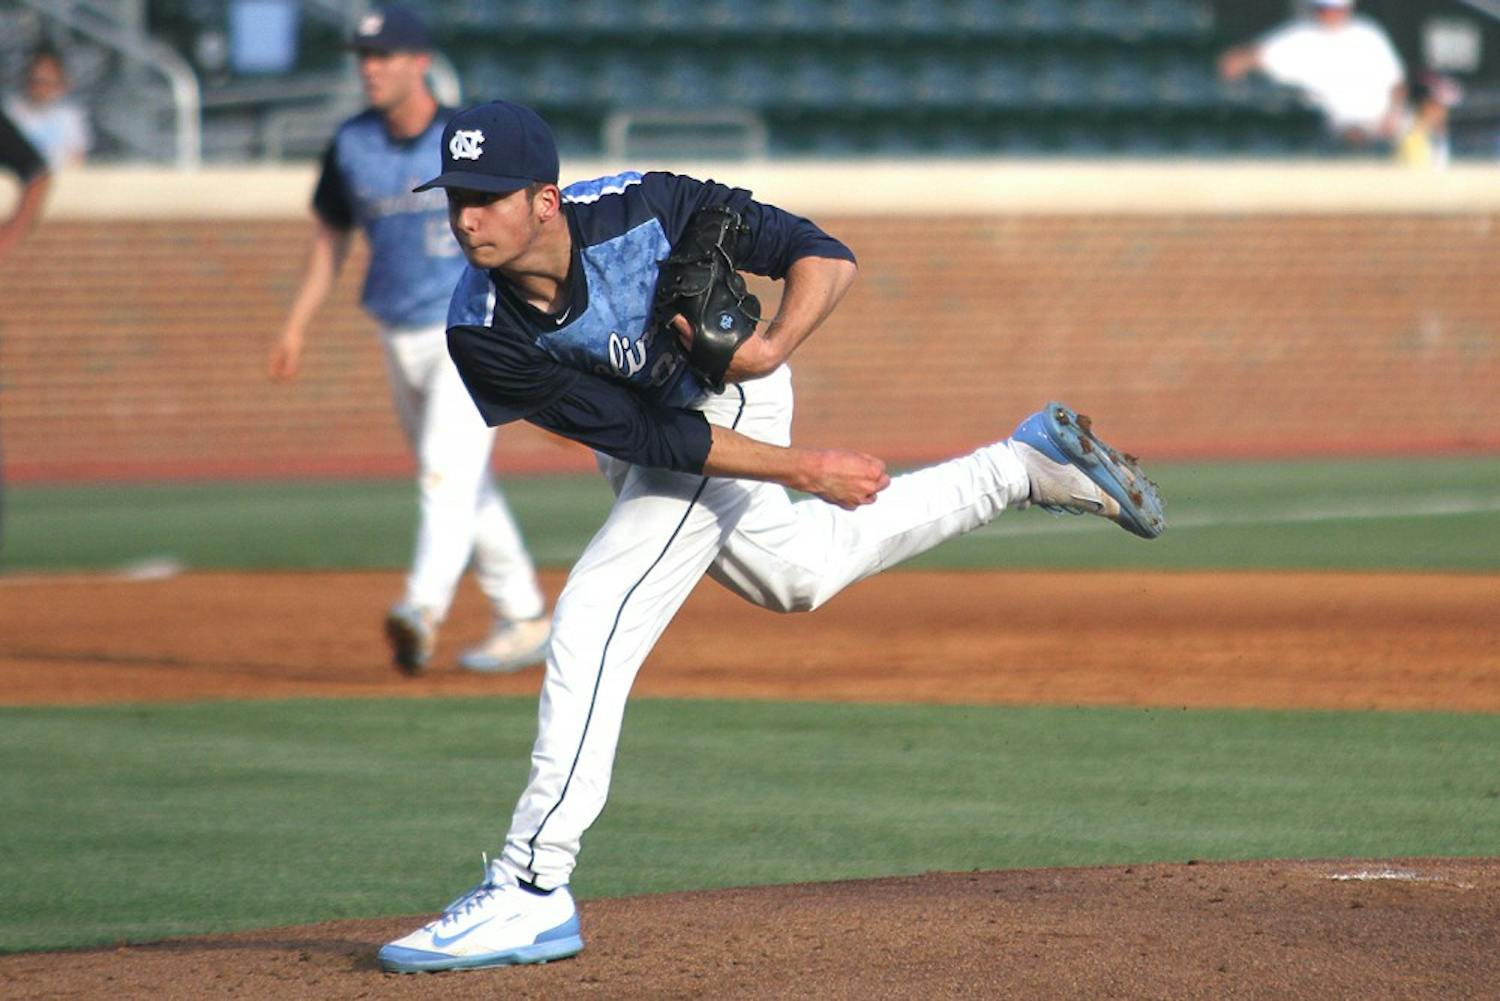 Zac Gallen opened the game as pitcher against Campbell during Tuesday night's game.